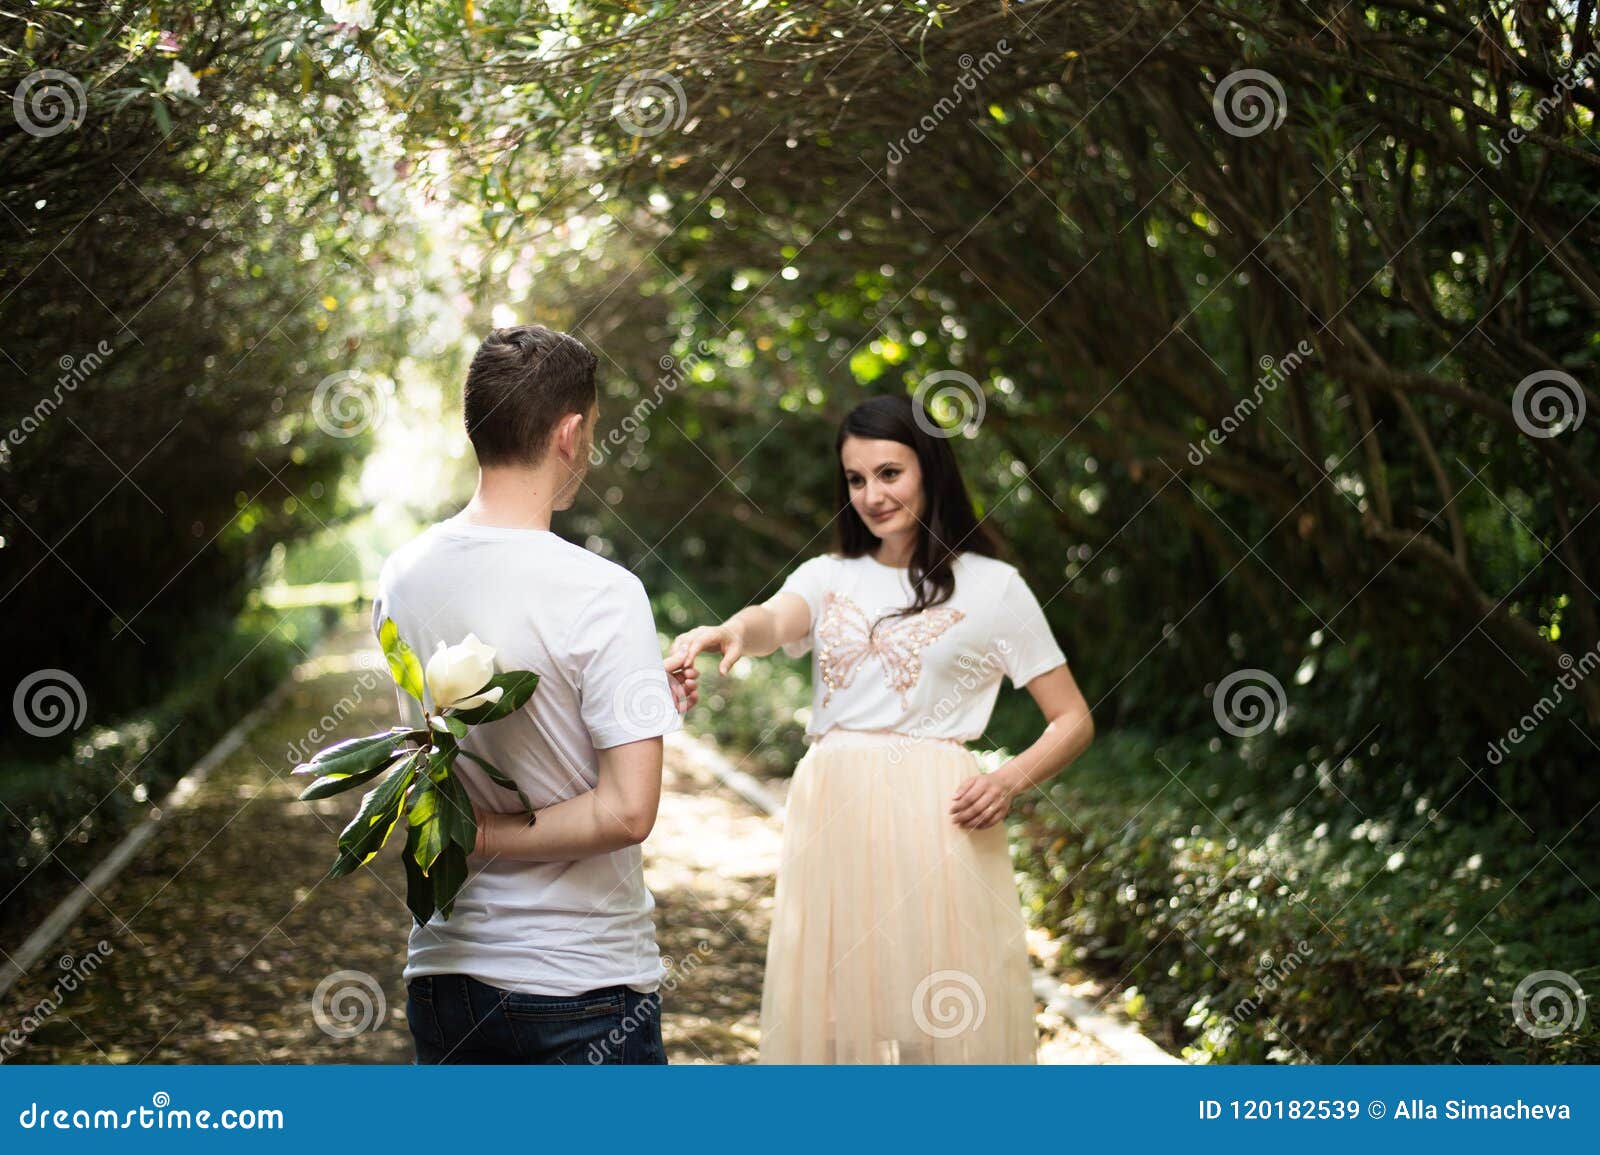 Couple In Love Beginning Of A Love Story A Man And A Girl Romantic Date In A Park Stock Image